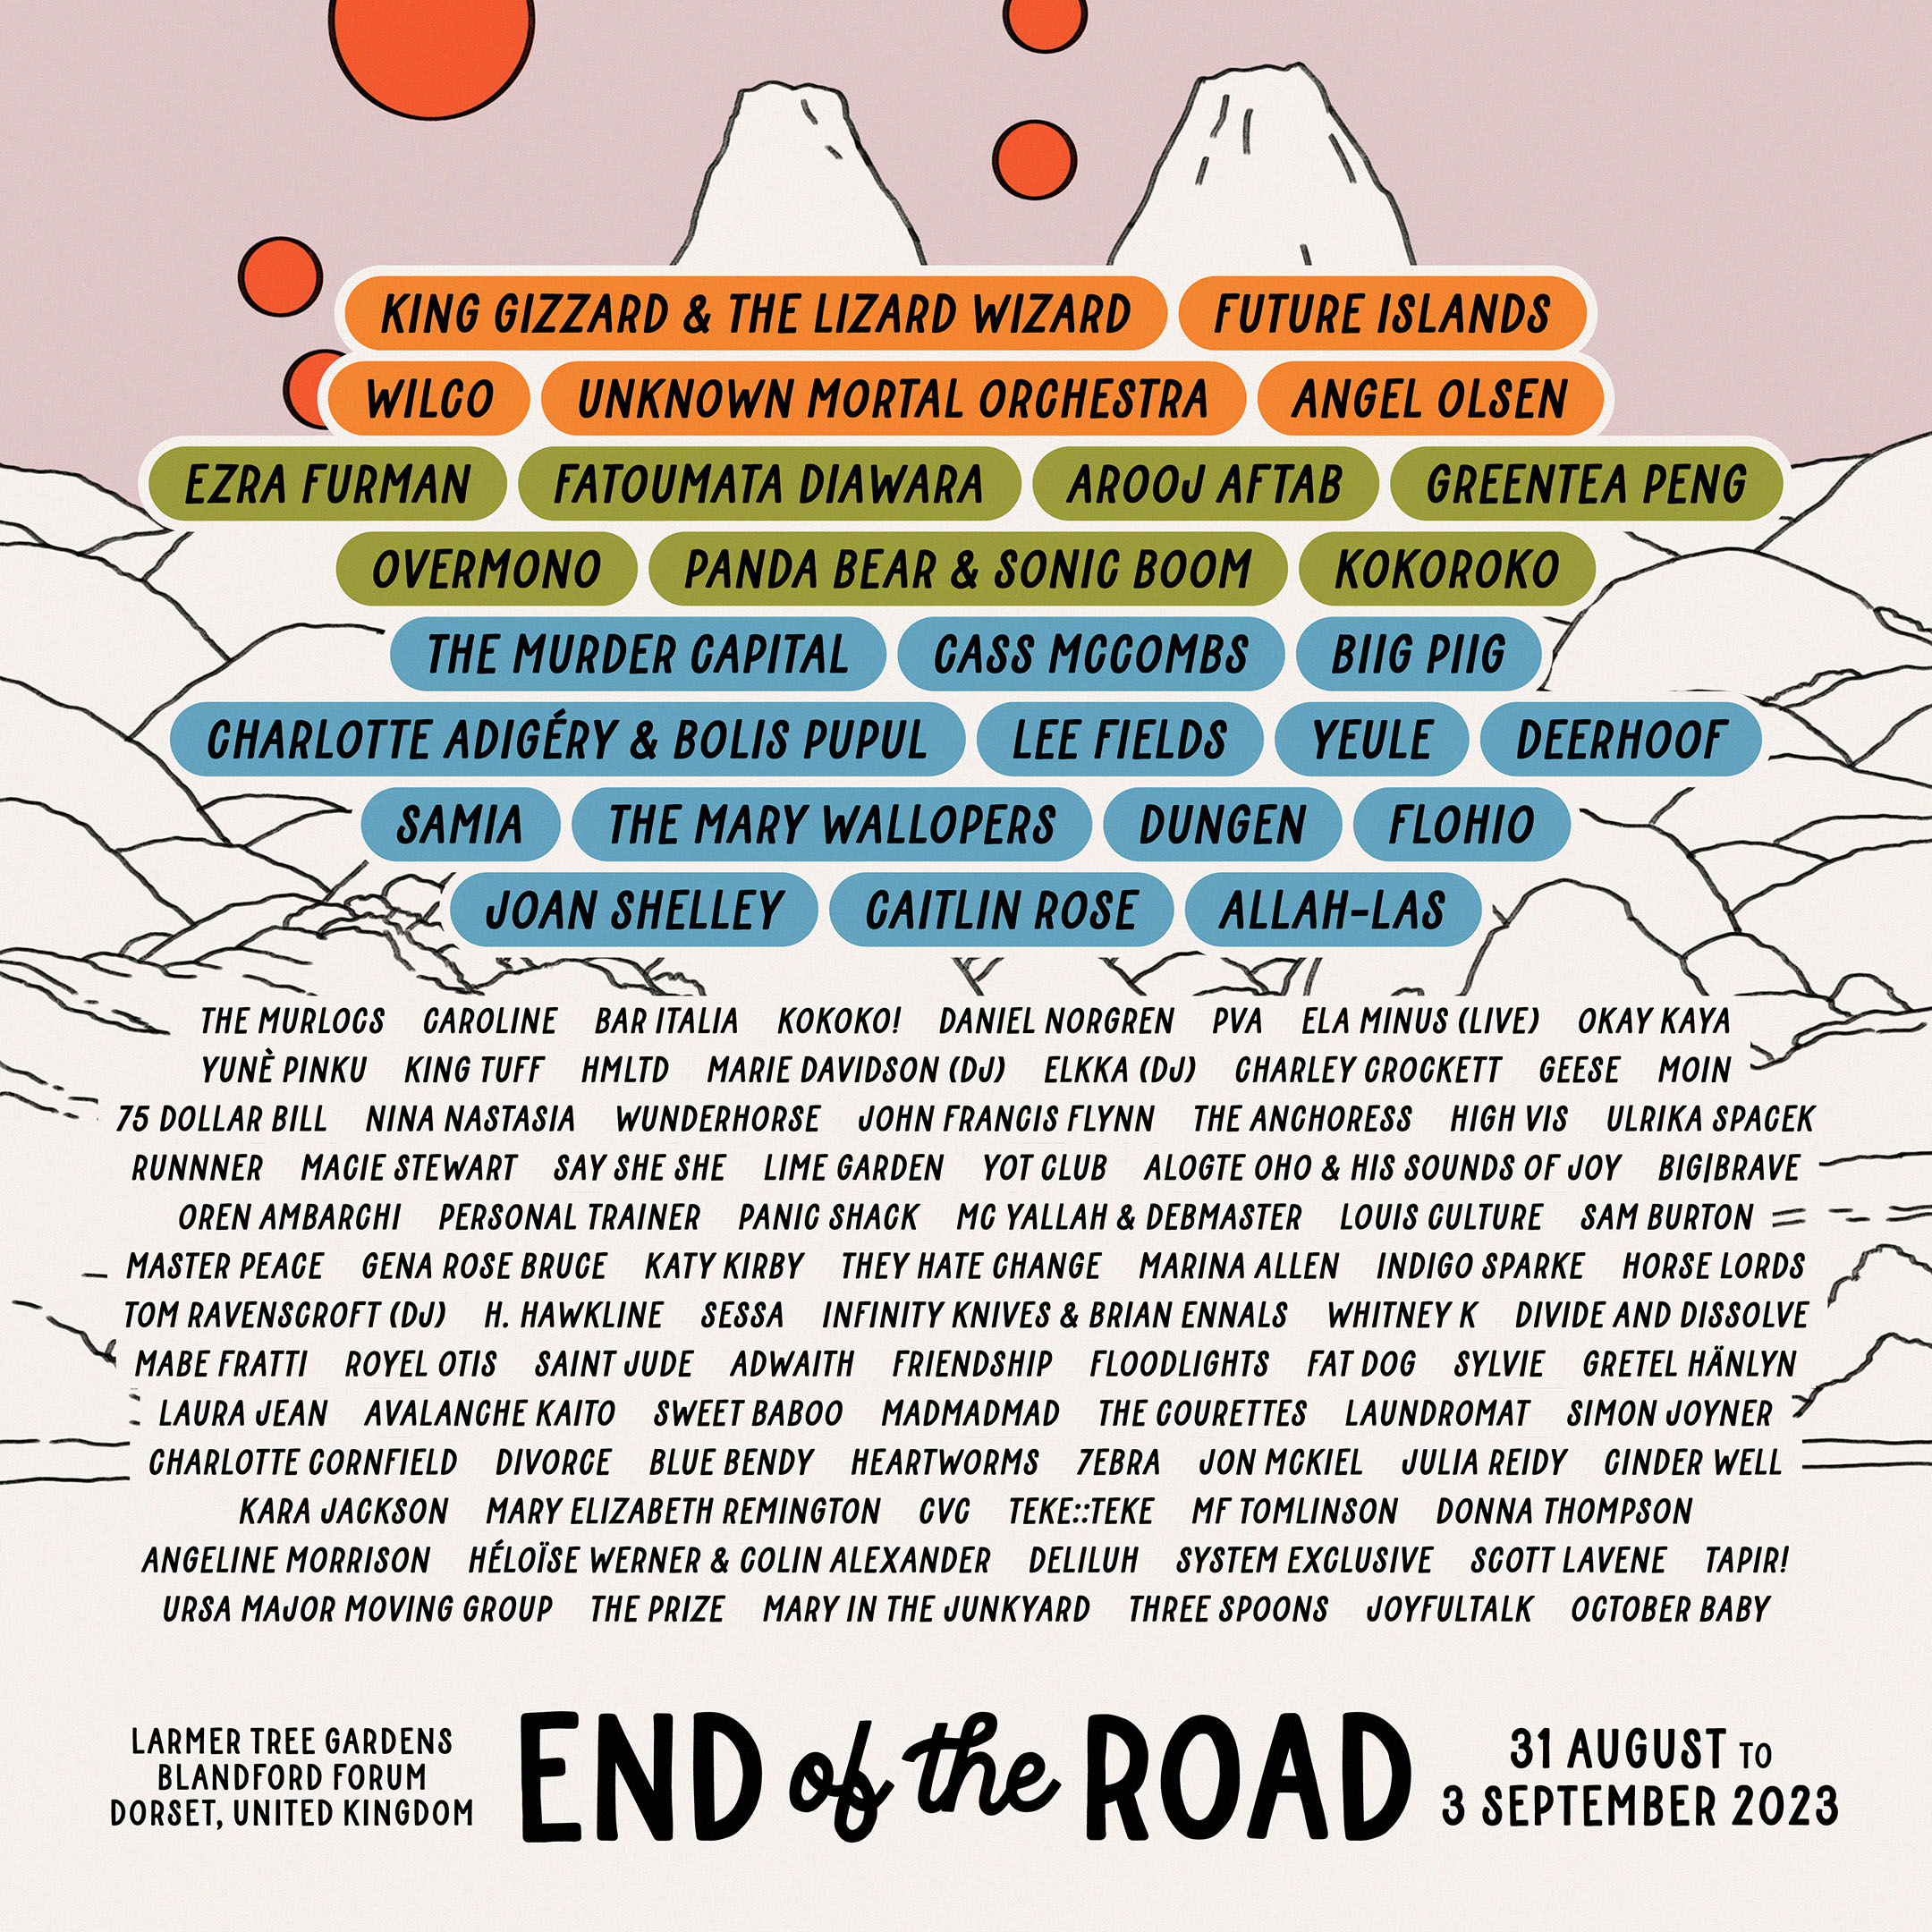 End of the Road 2023 lineup